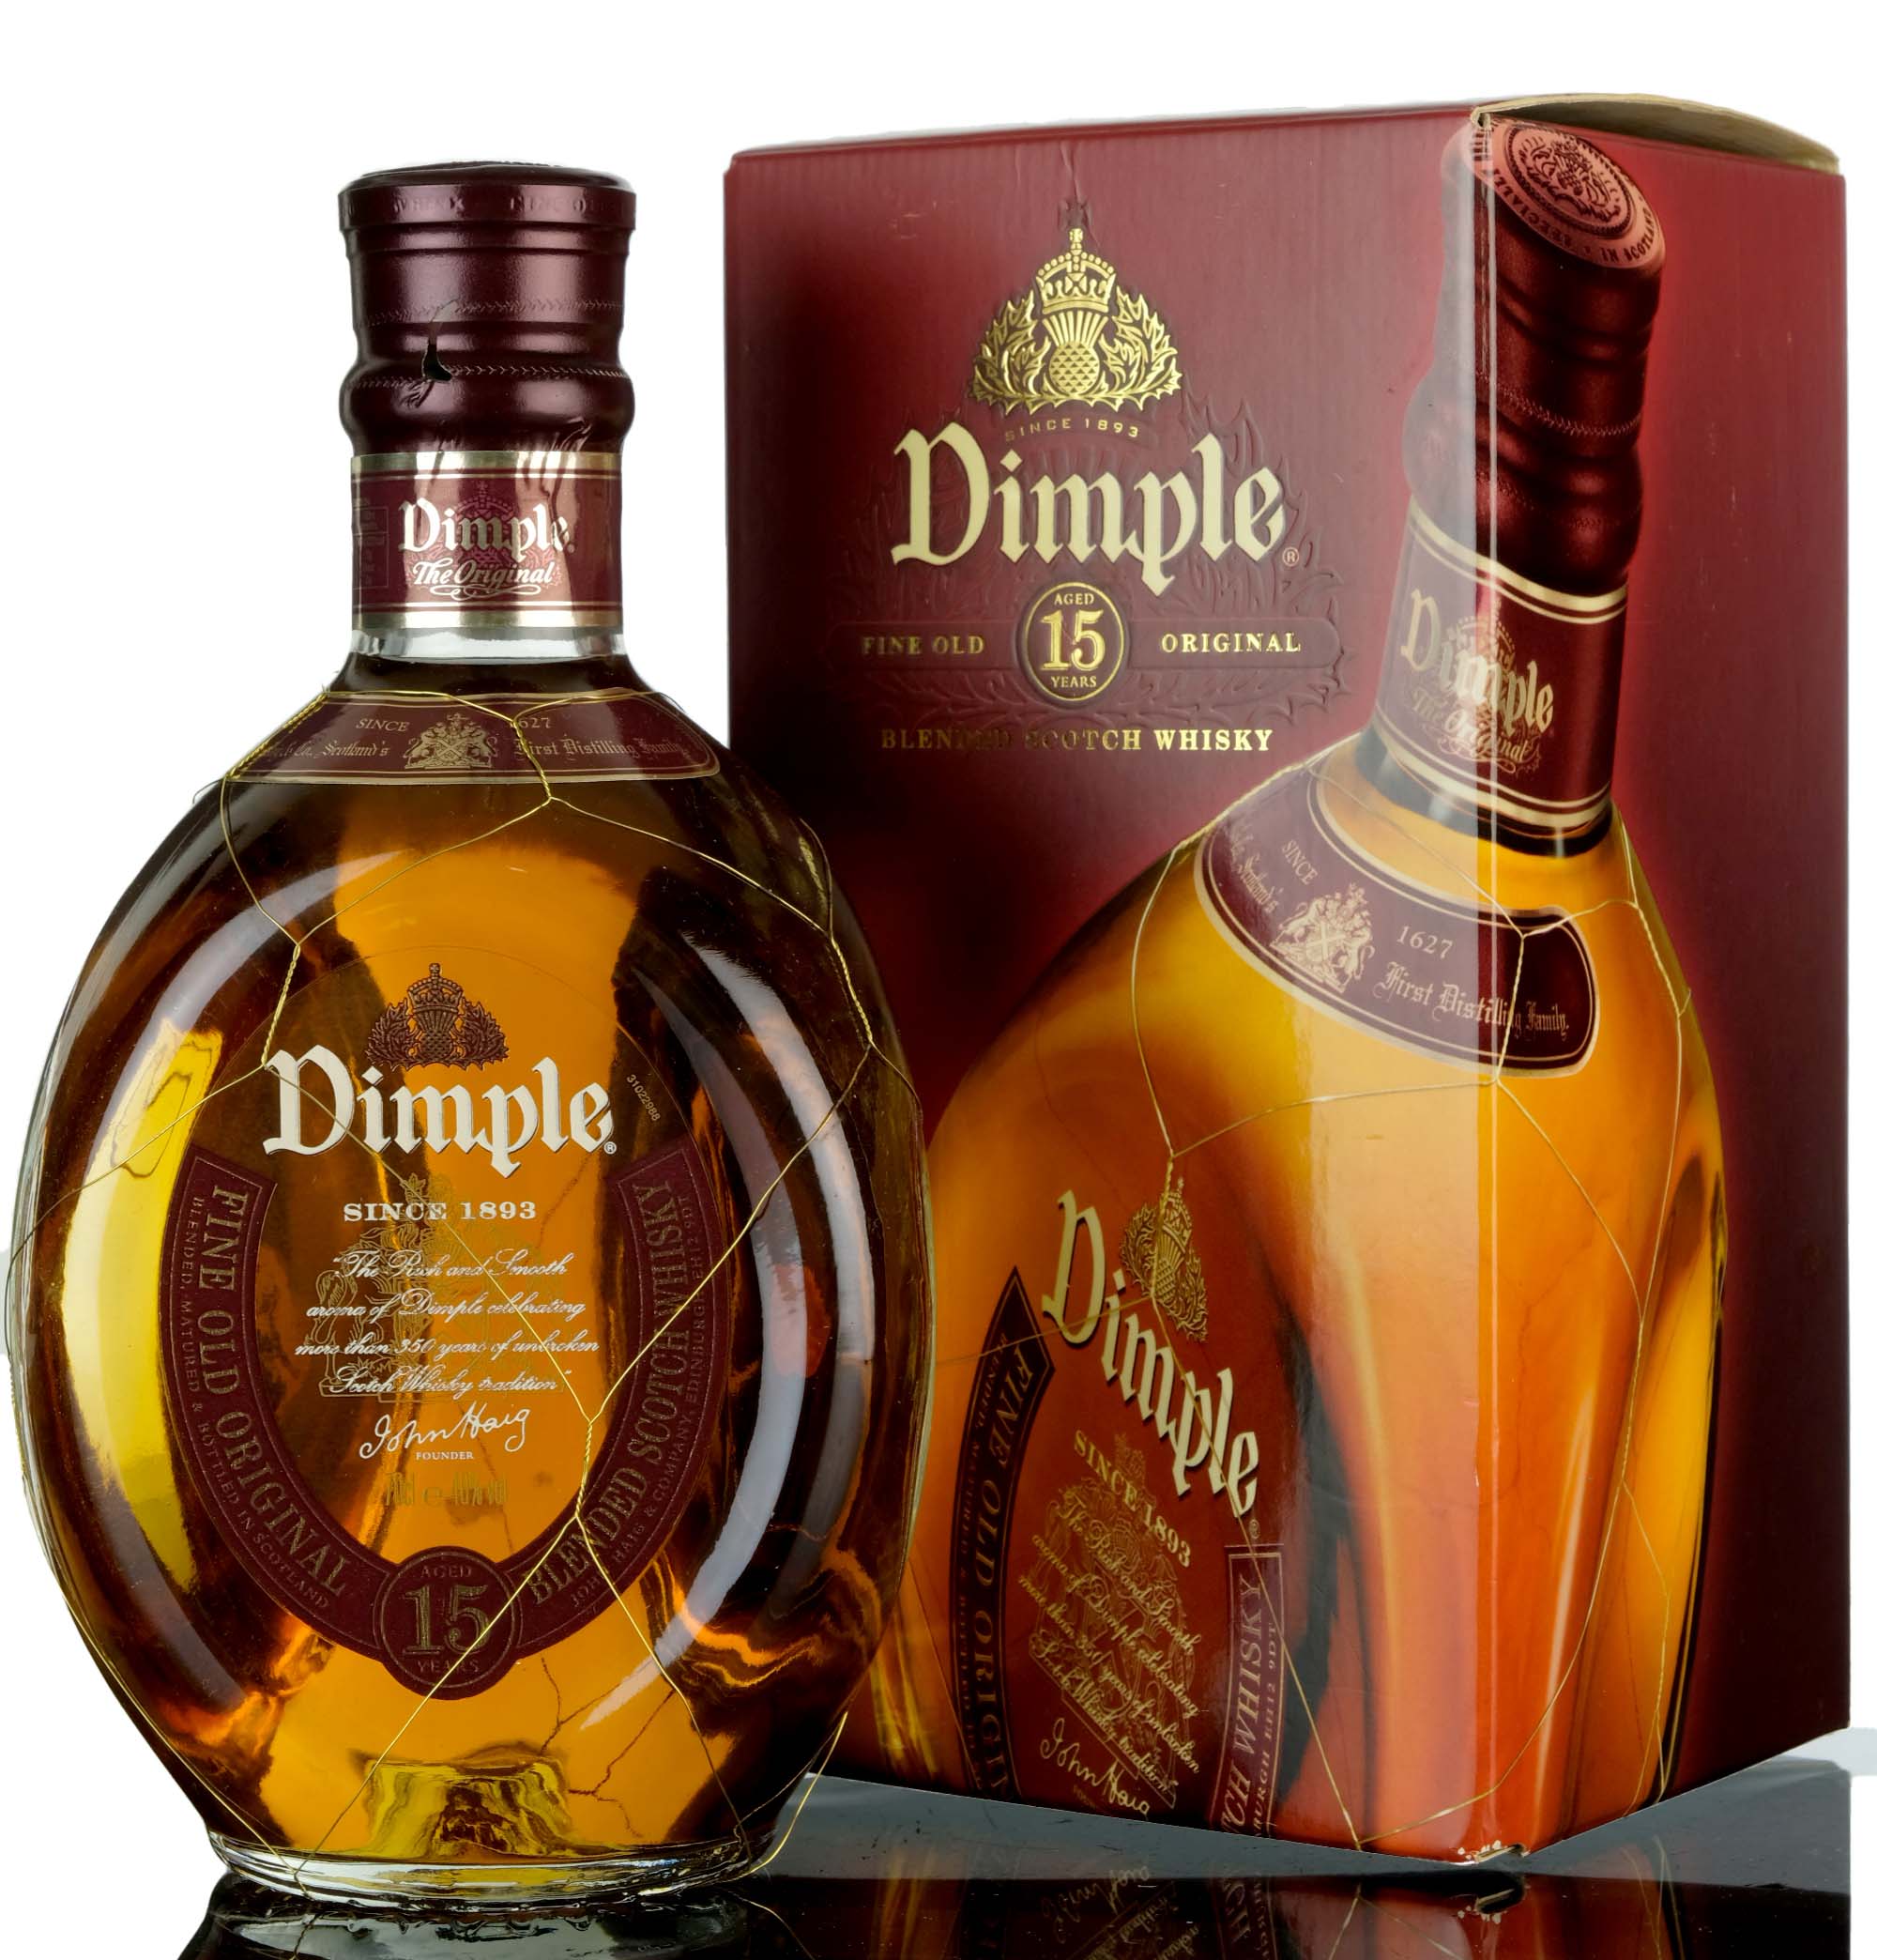 Dimple 15 Year Old - Fine Old Original